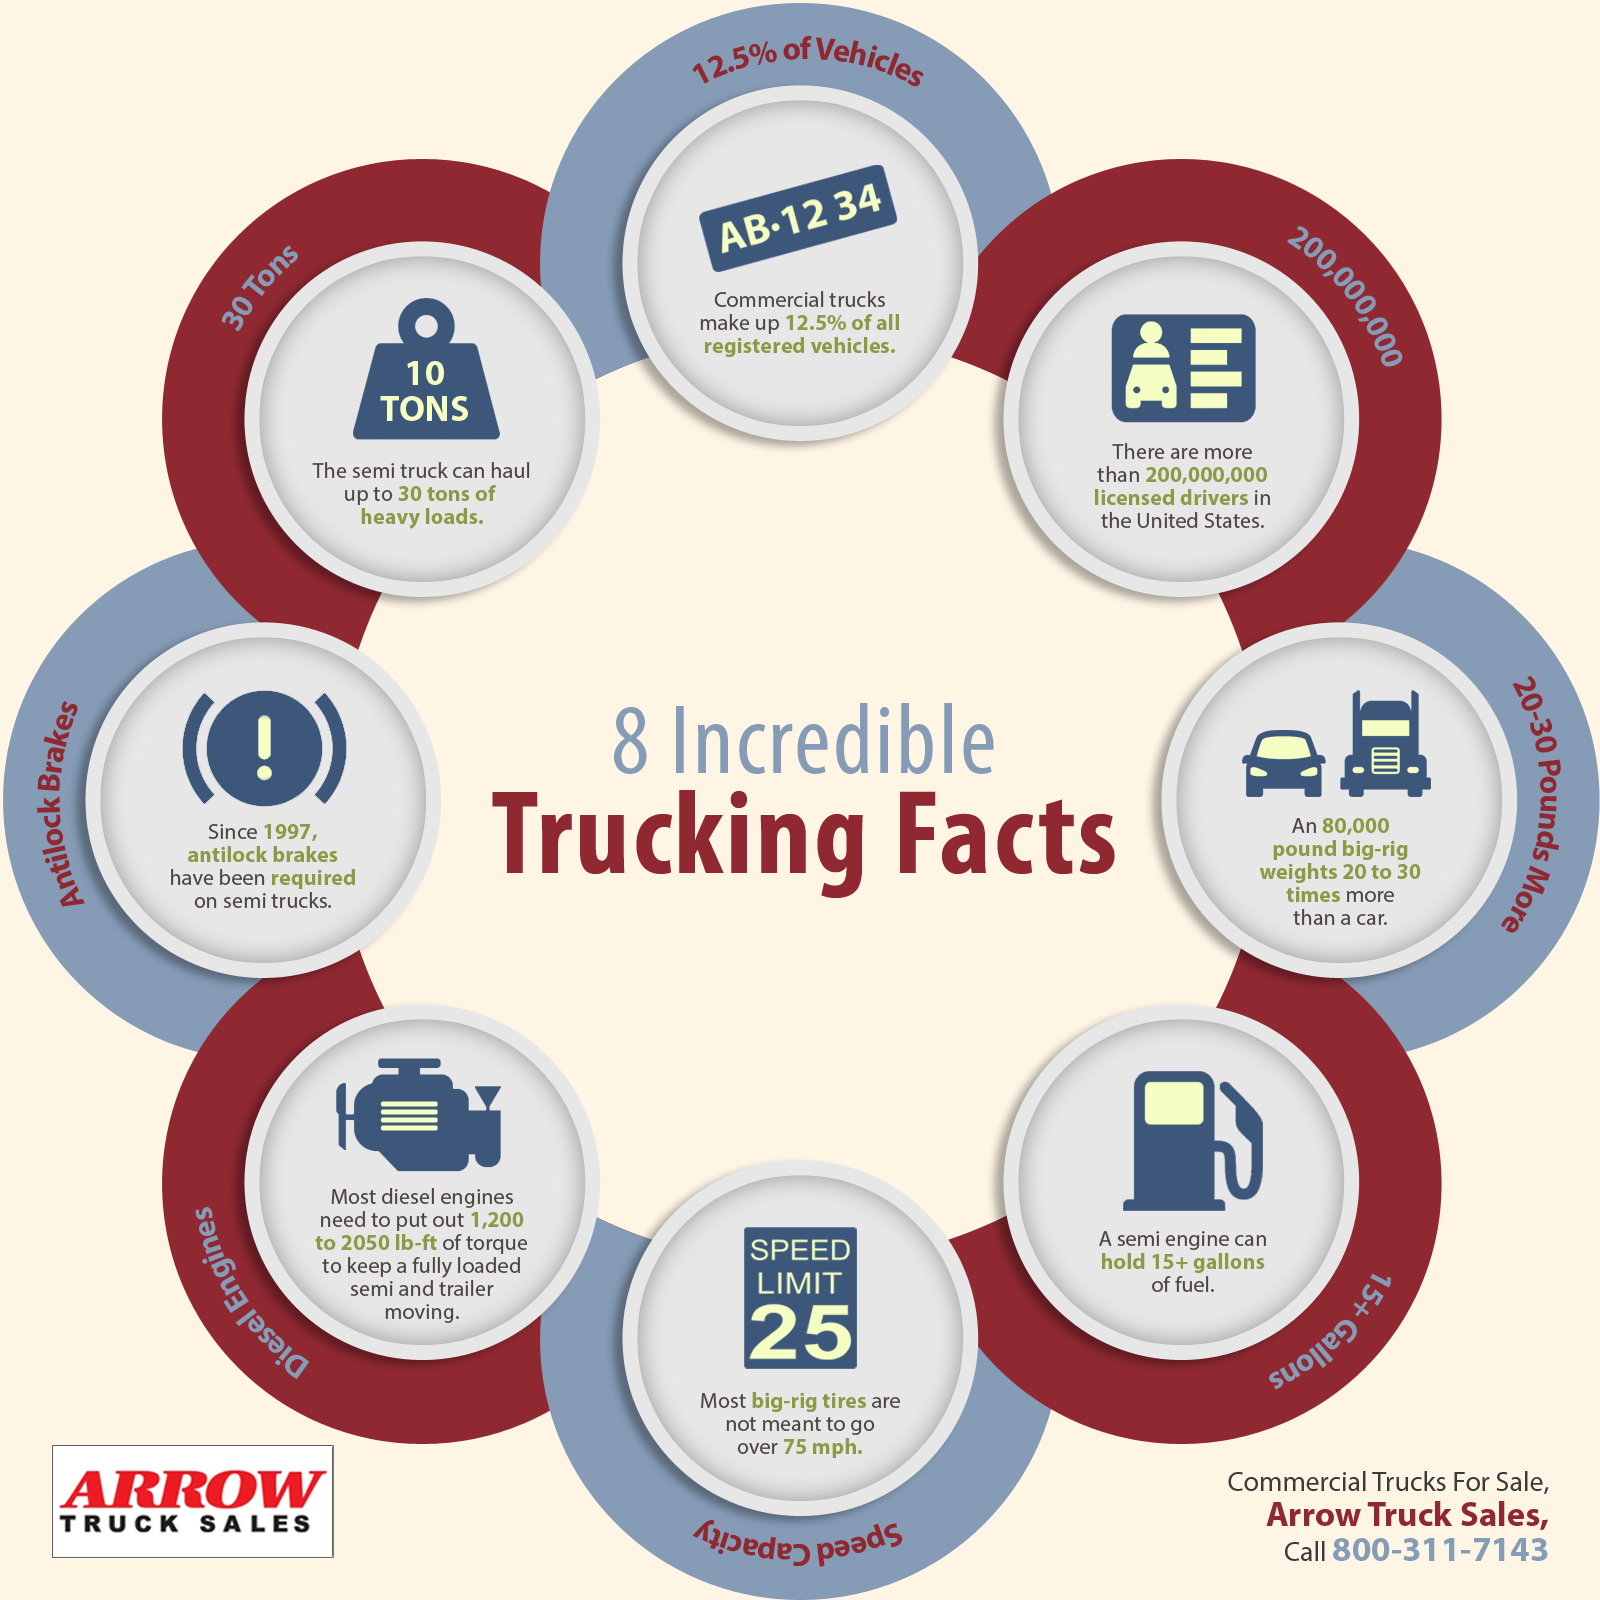 8 Incredible Trucking Facts Shared Info Graphics